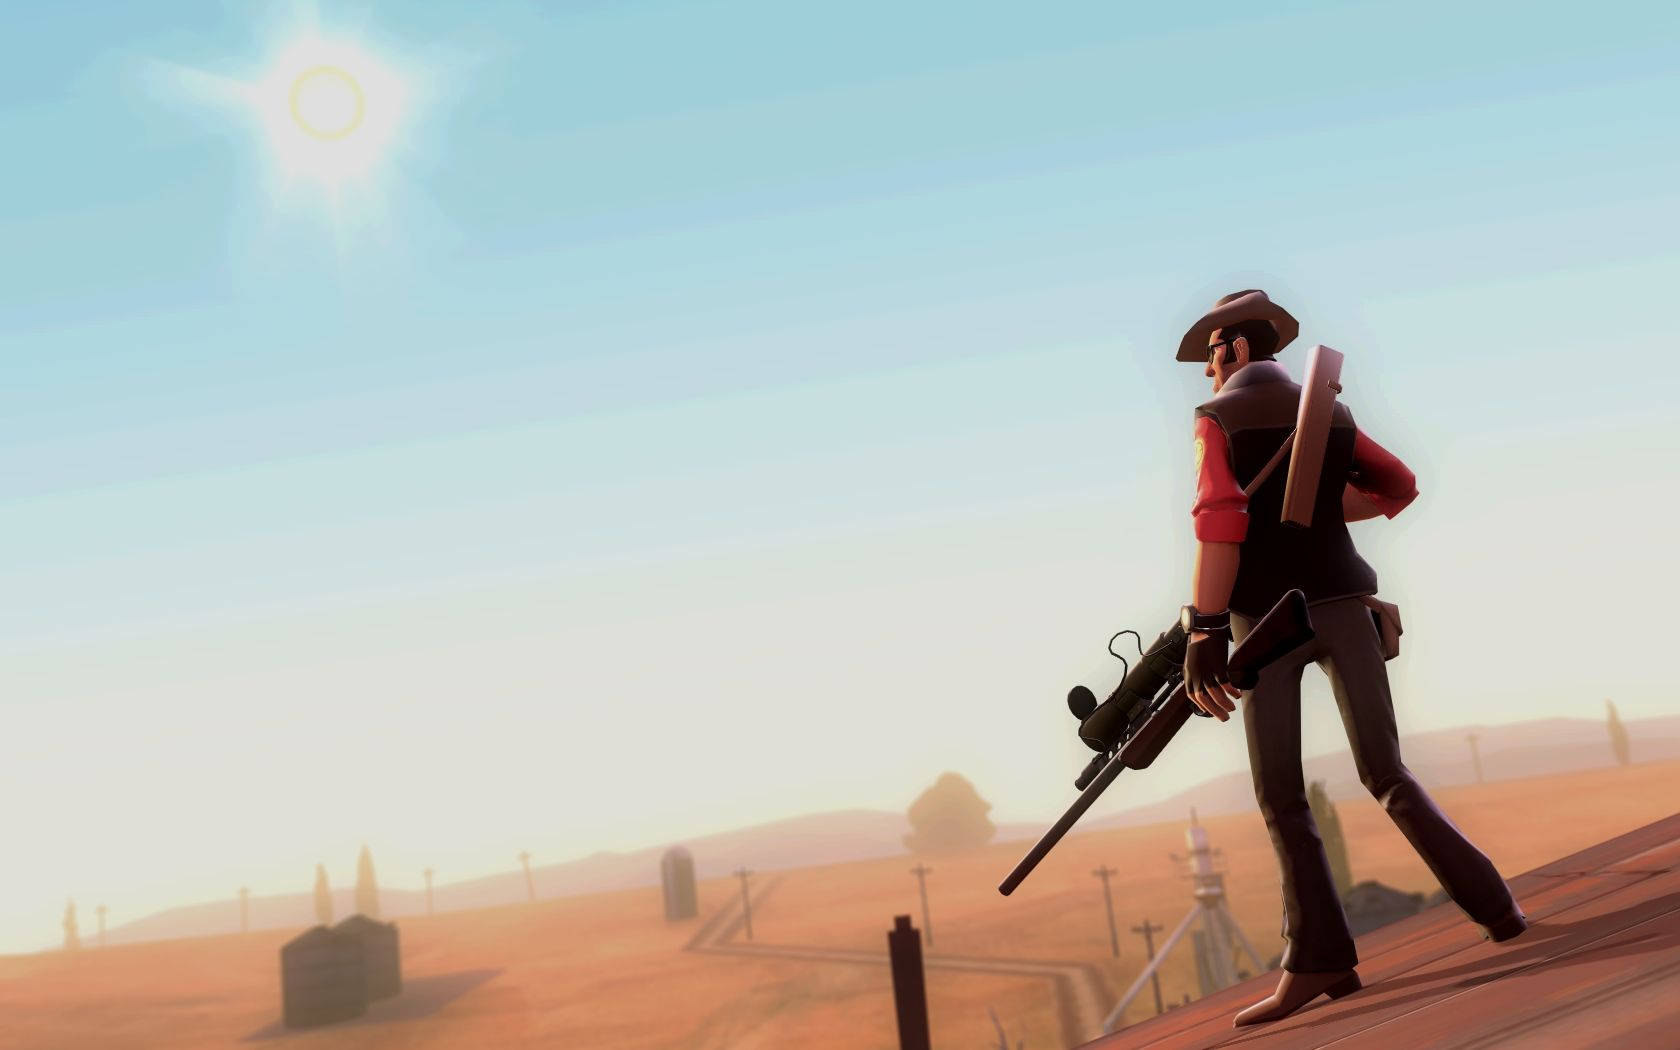 Tf2 Sniper In Country Wallpaper